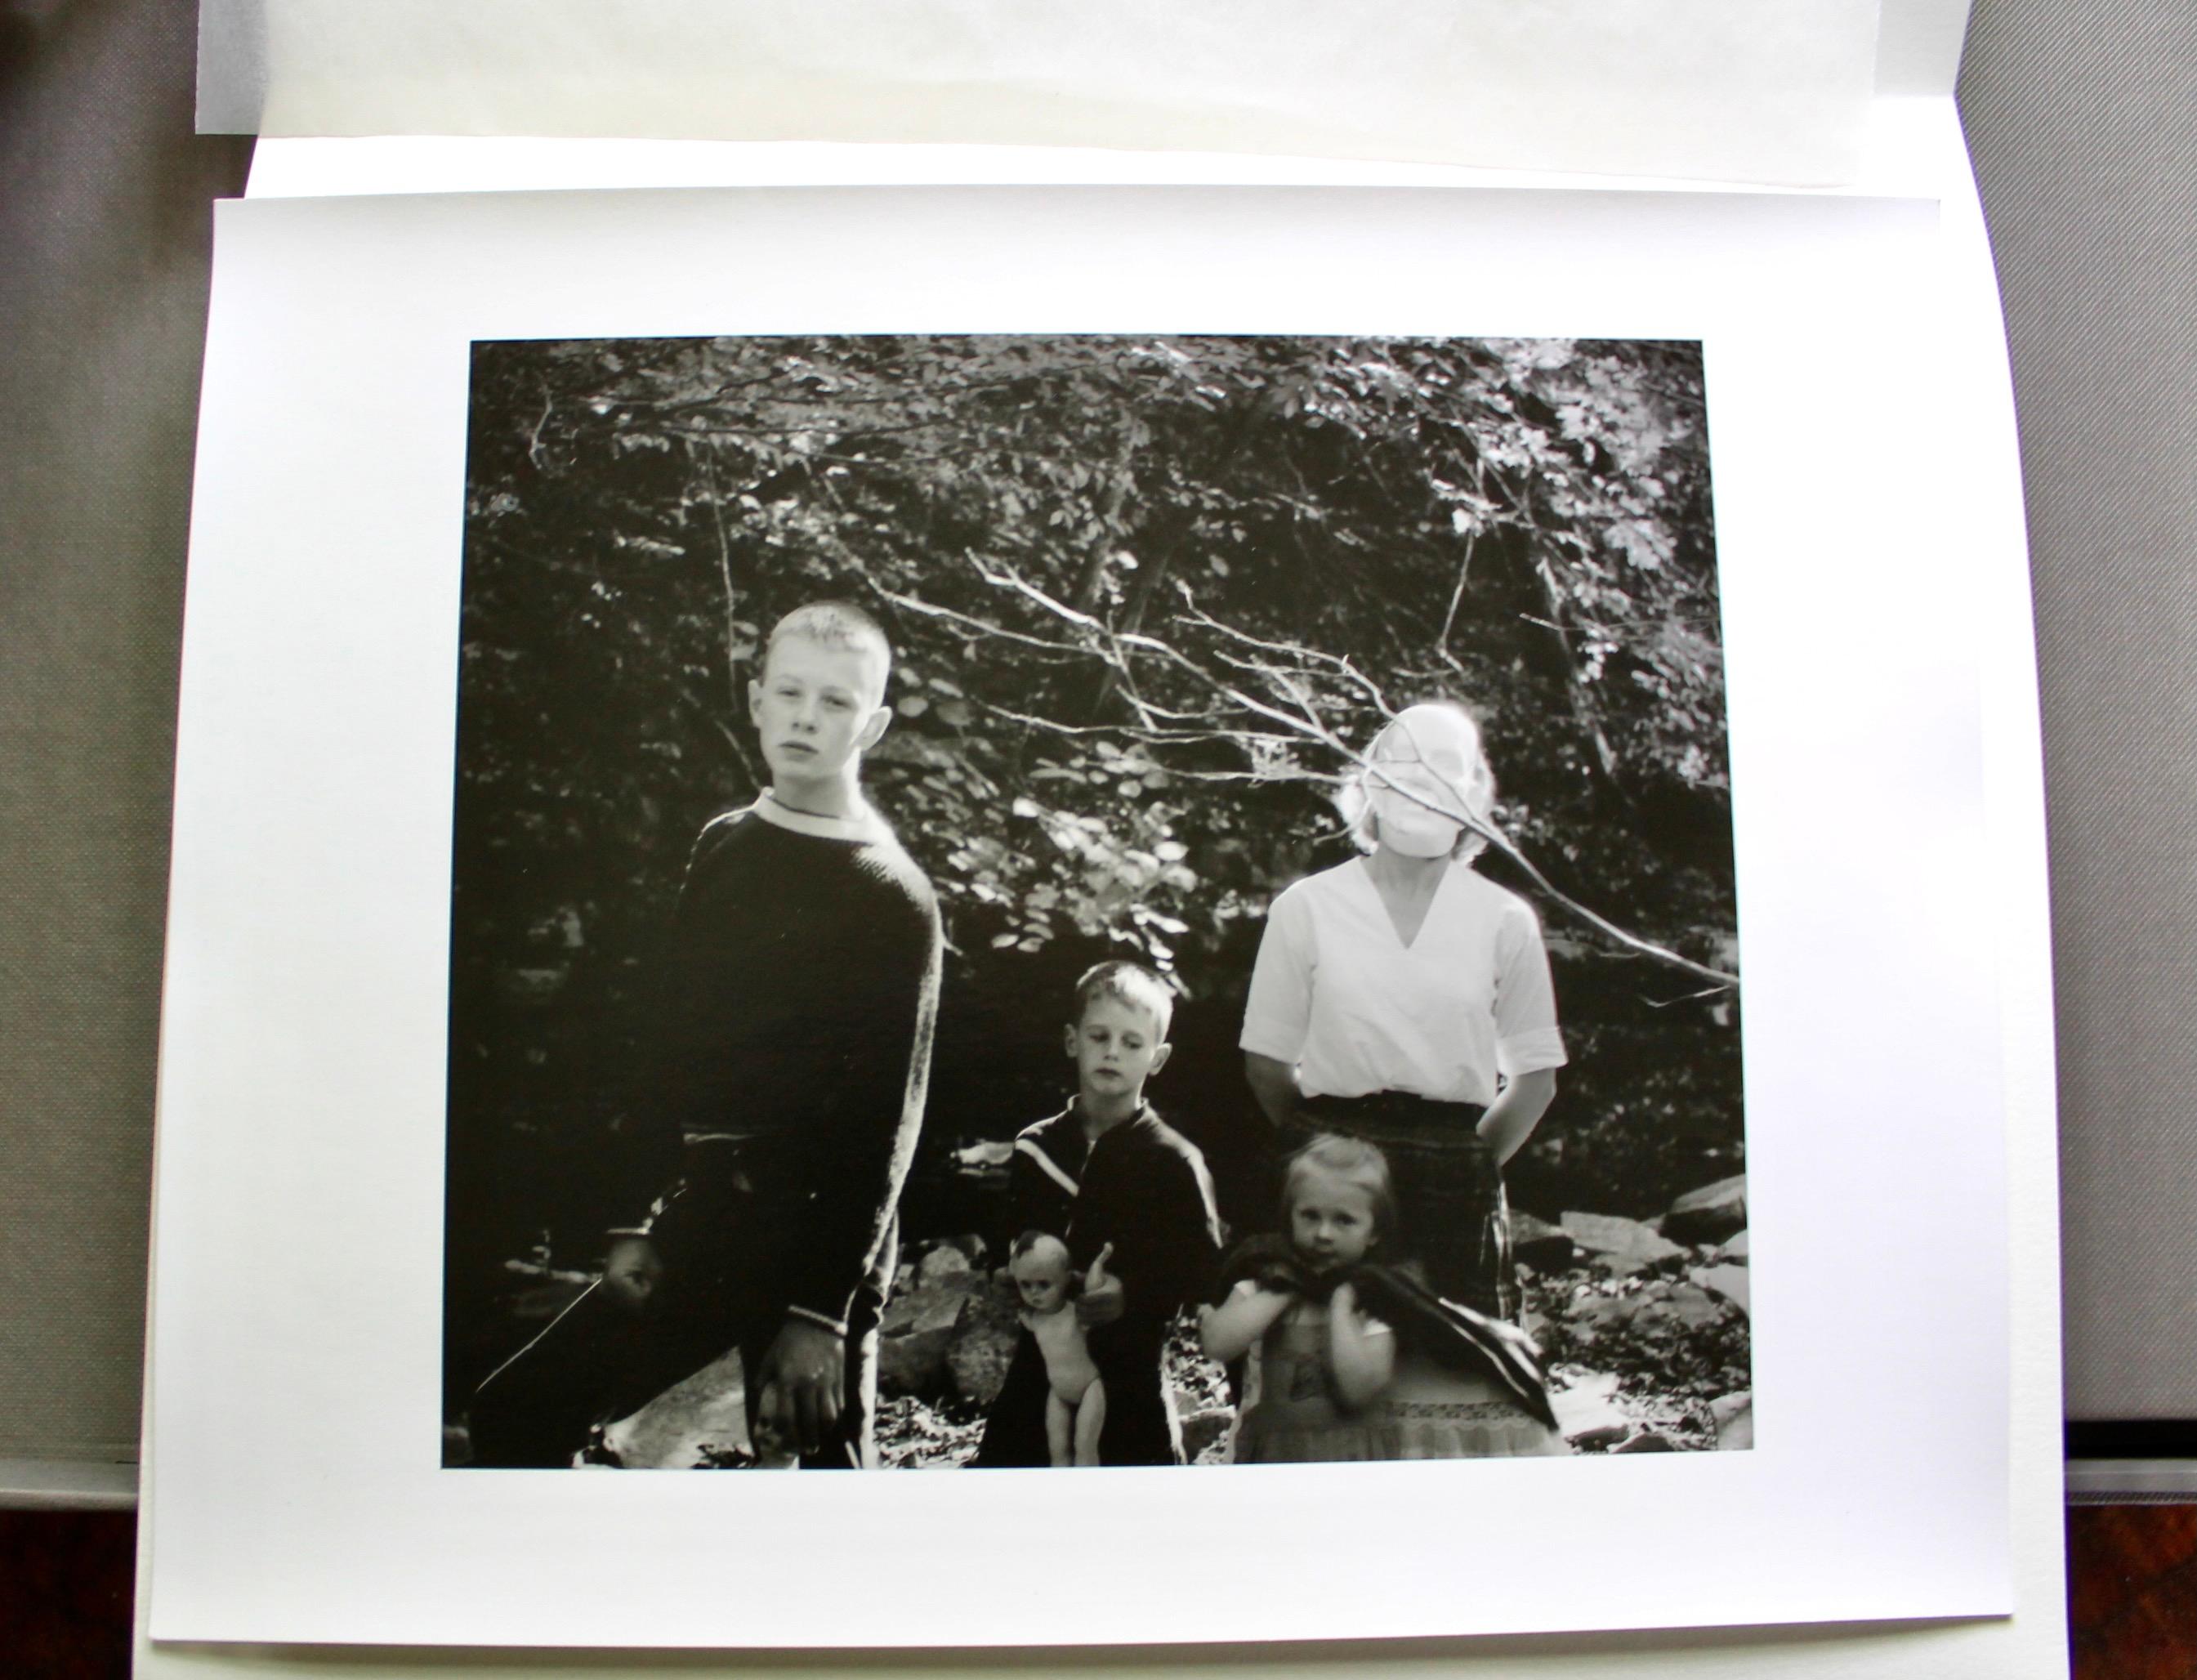 First Edition, First Printing. Limited Edition to 30 copies with contemporary gelatin silver print 